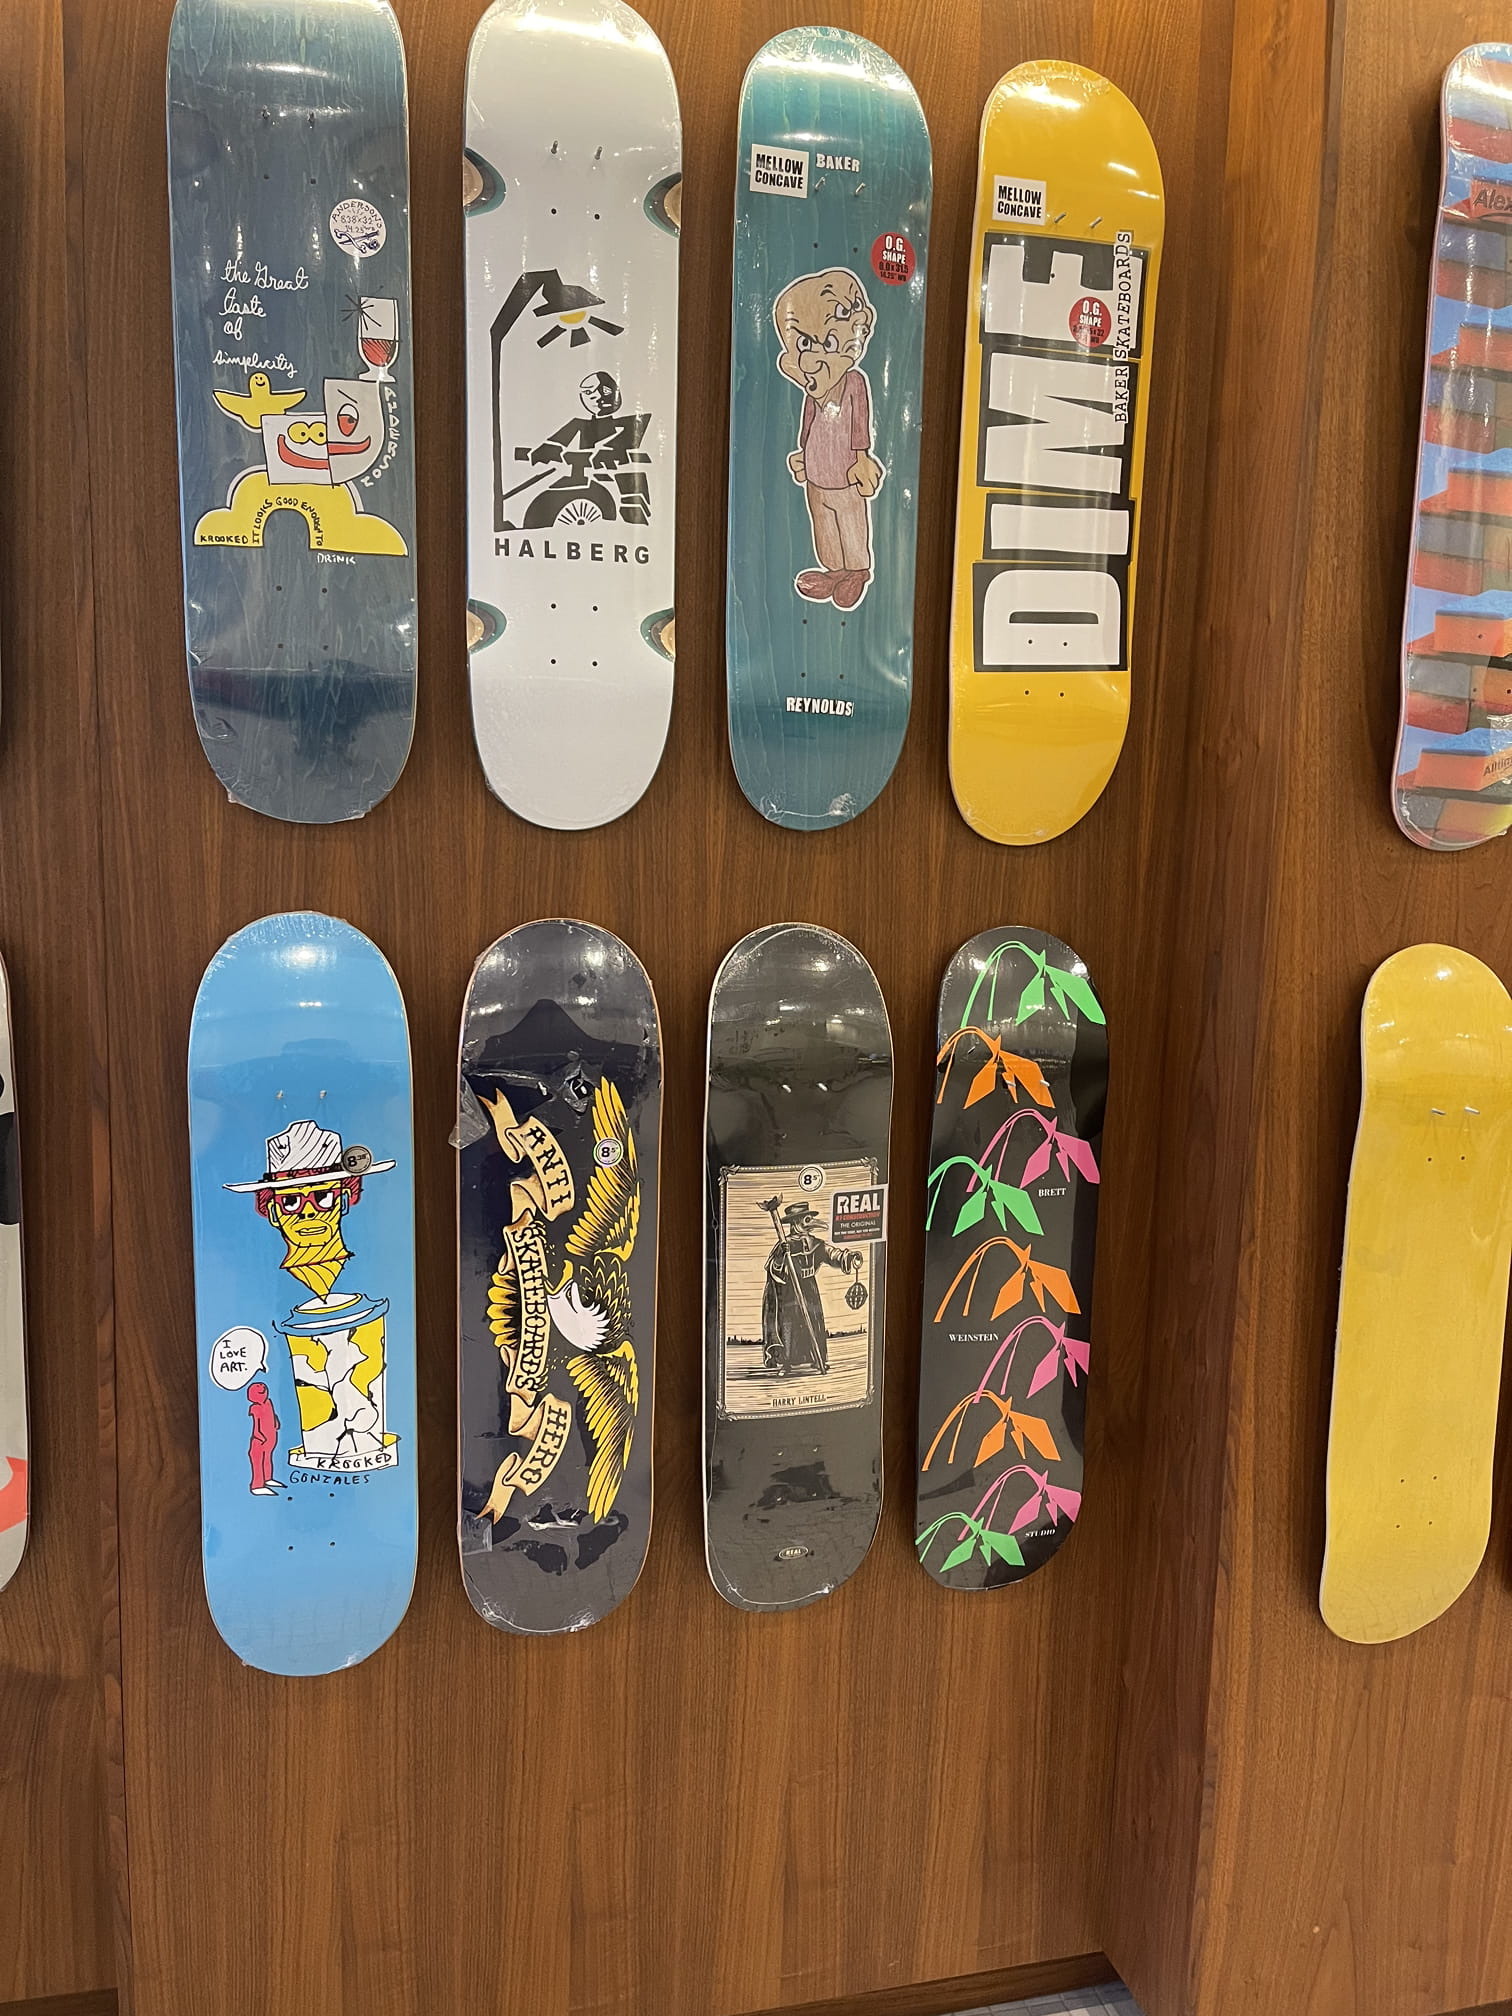 These were the boards for sale at dime. Include awesome antihero decks and brett winesteins deck. Also a sweet krooked deck and dime baker deck.